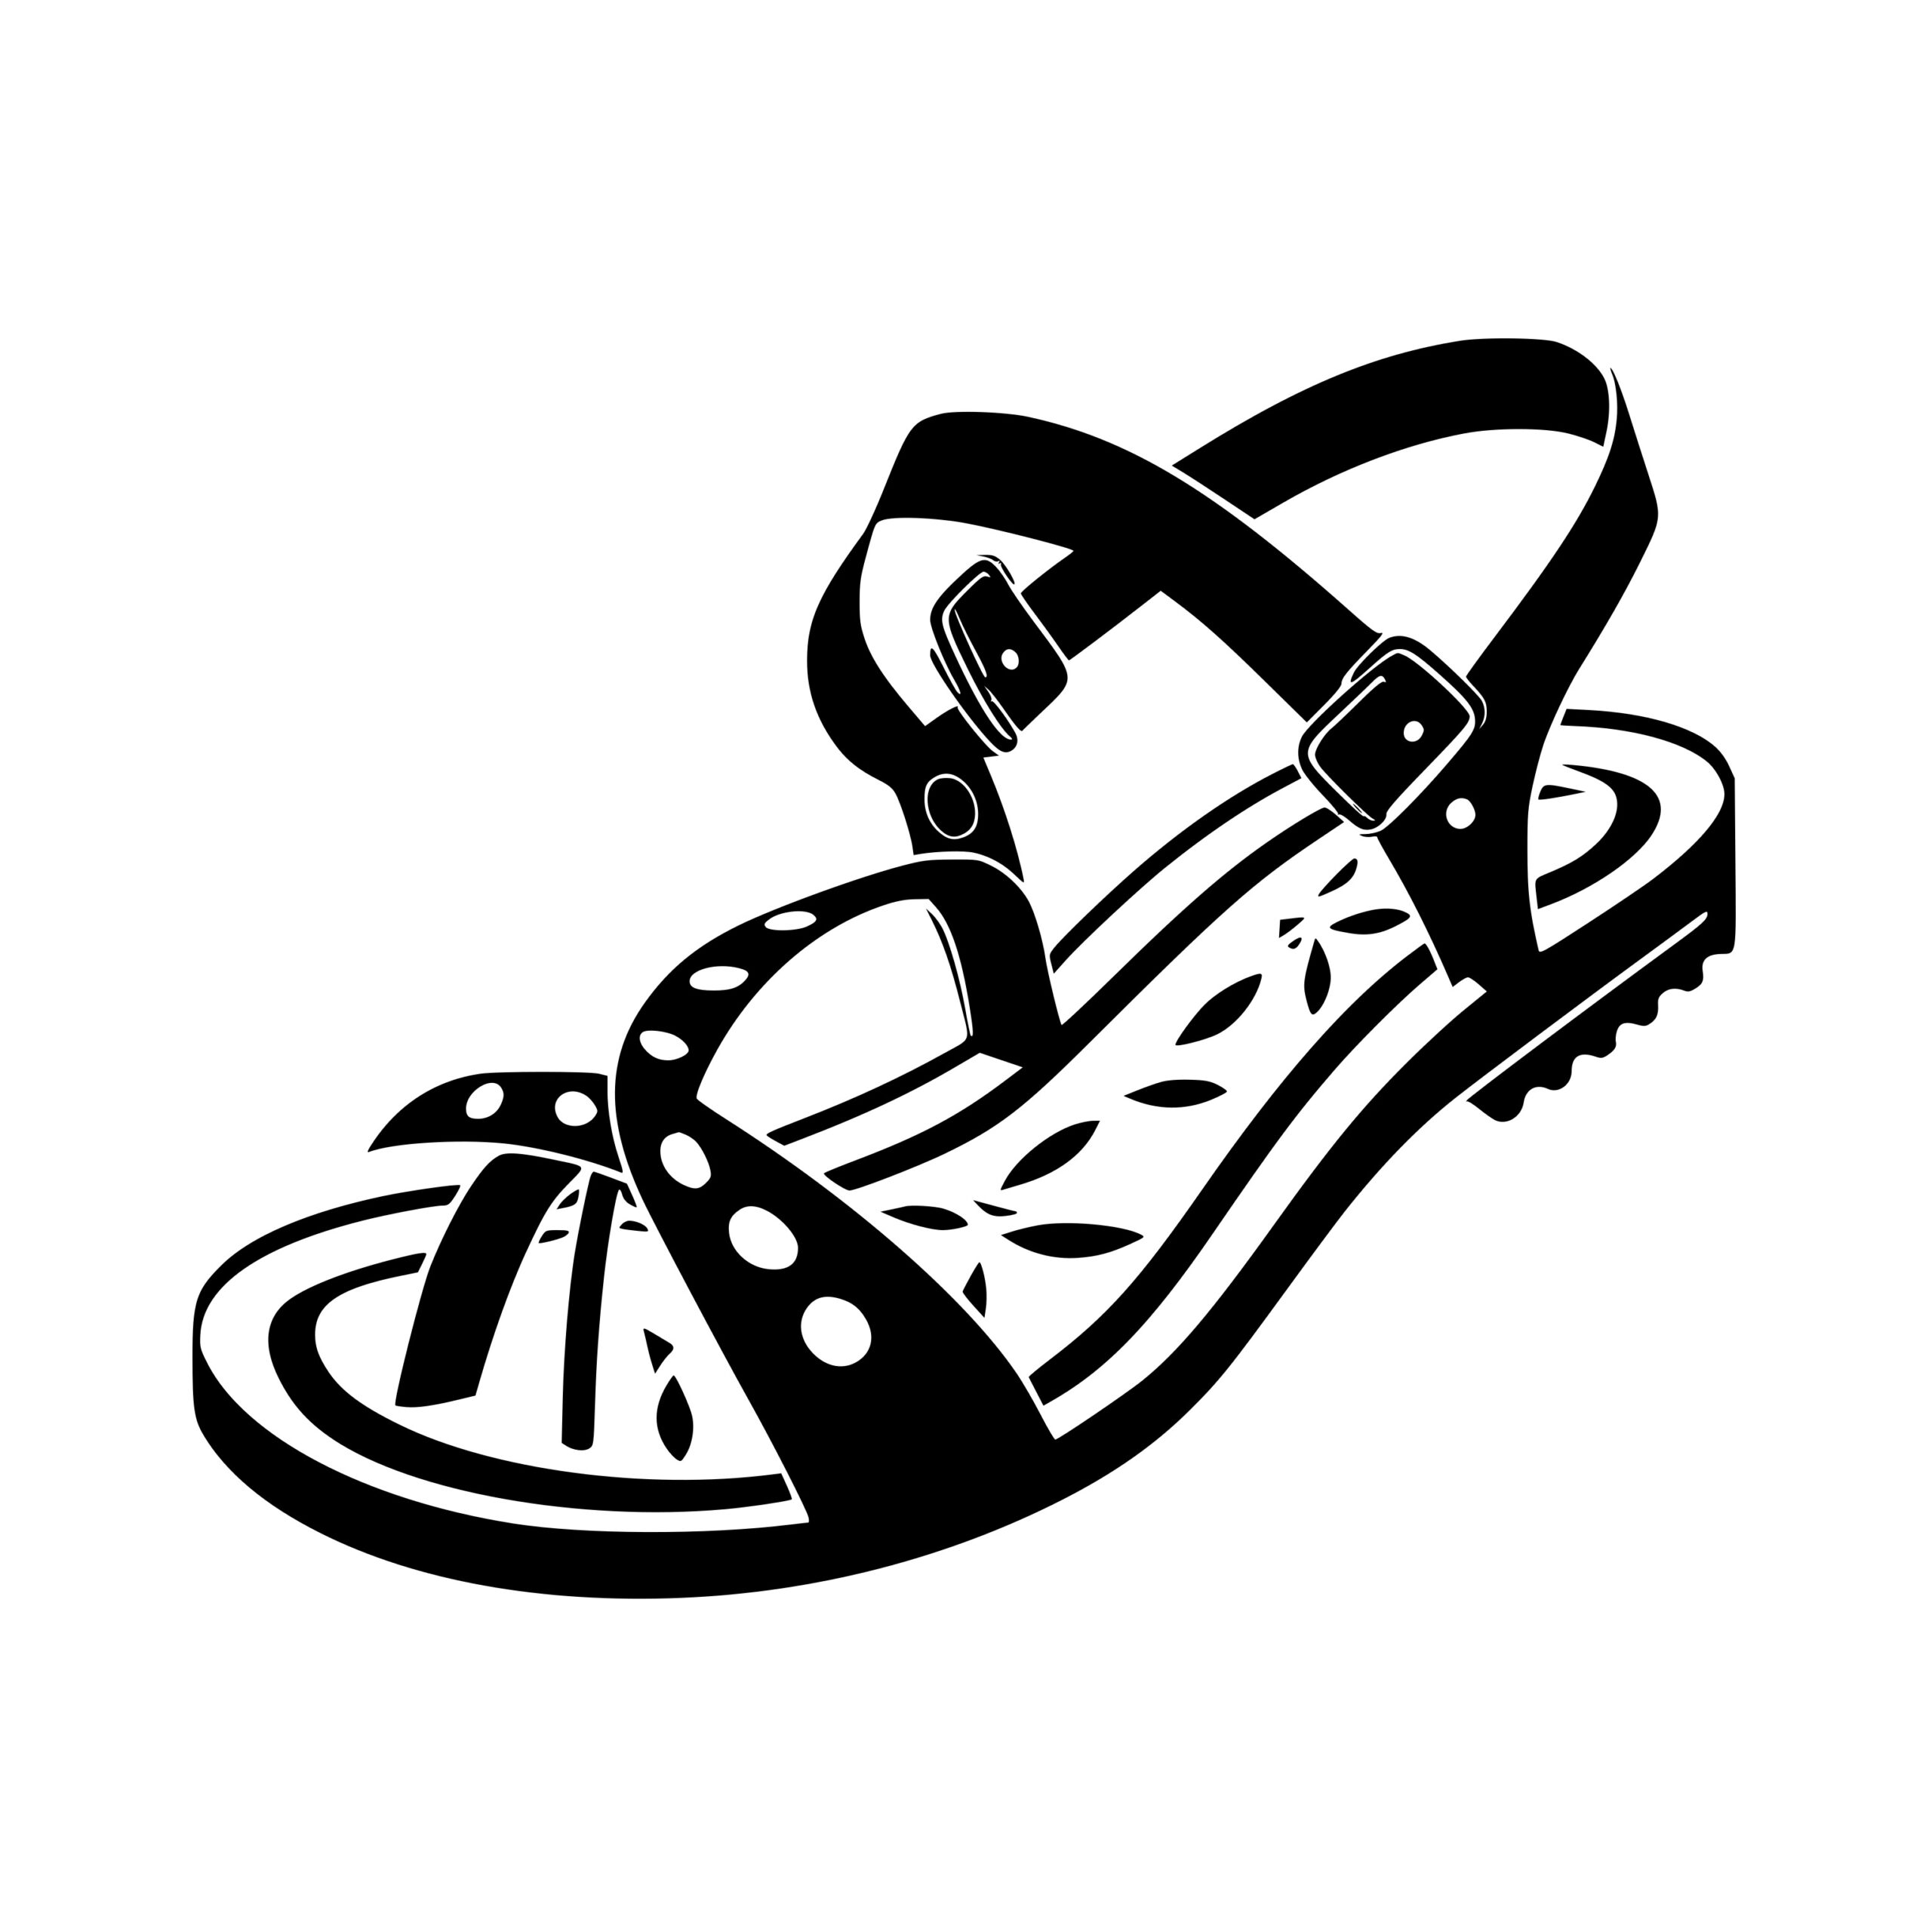 Fun and Flirty Sandals SVG File for Cricut, Silhouette, Laser Machines